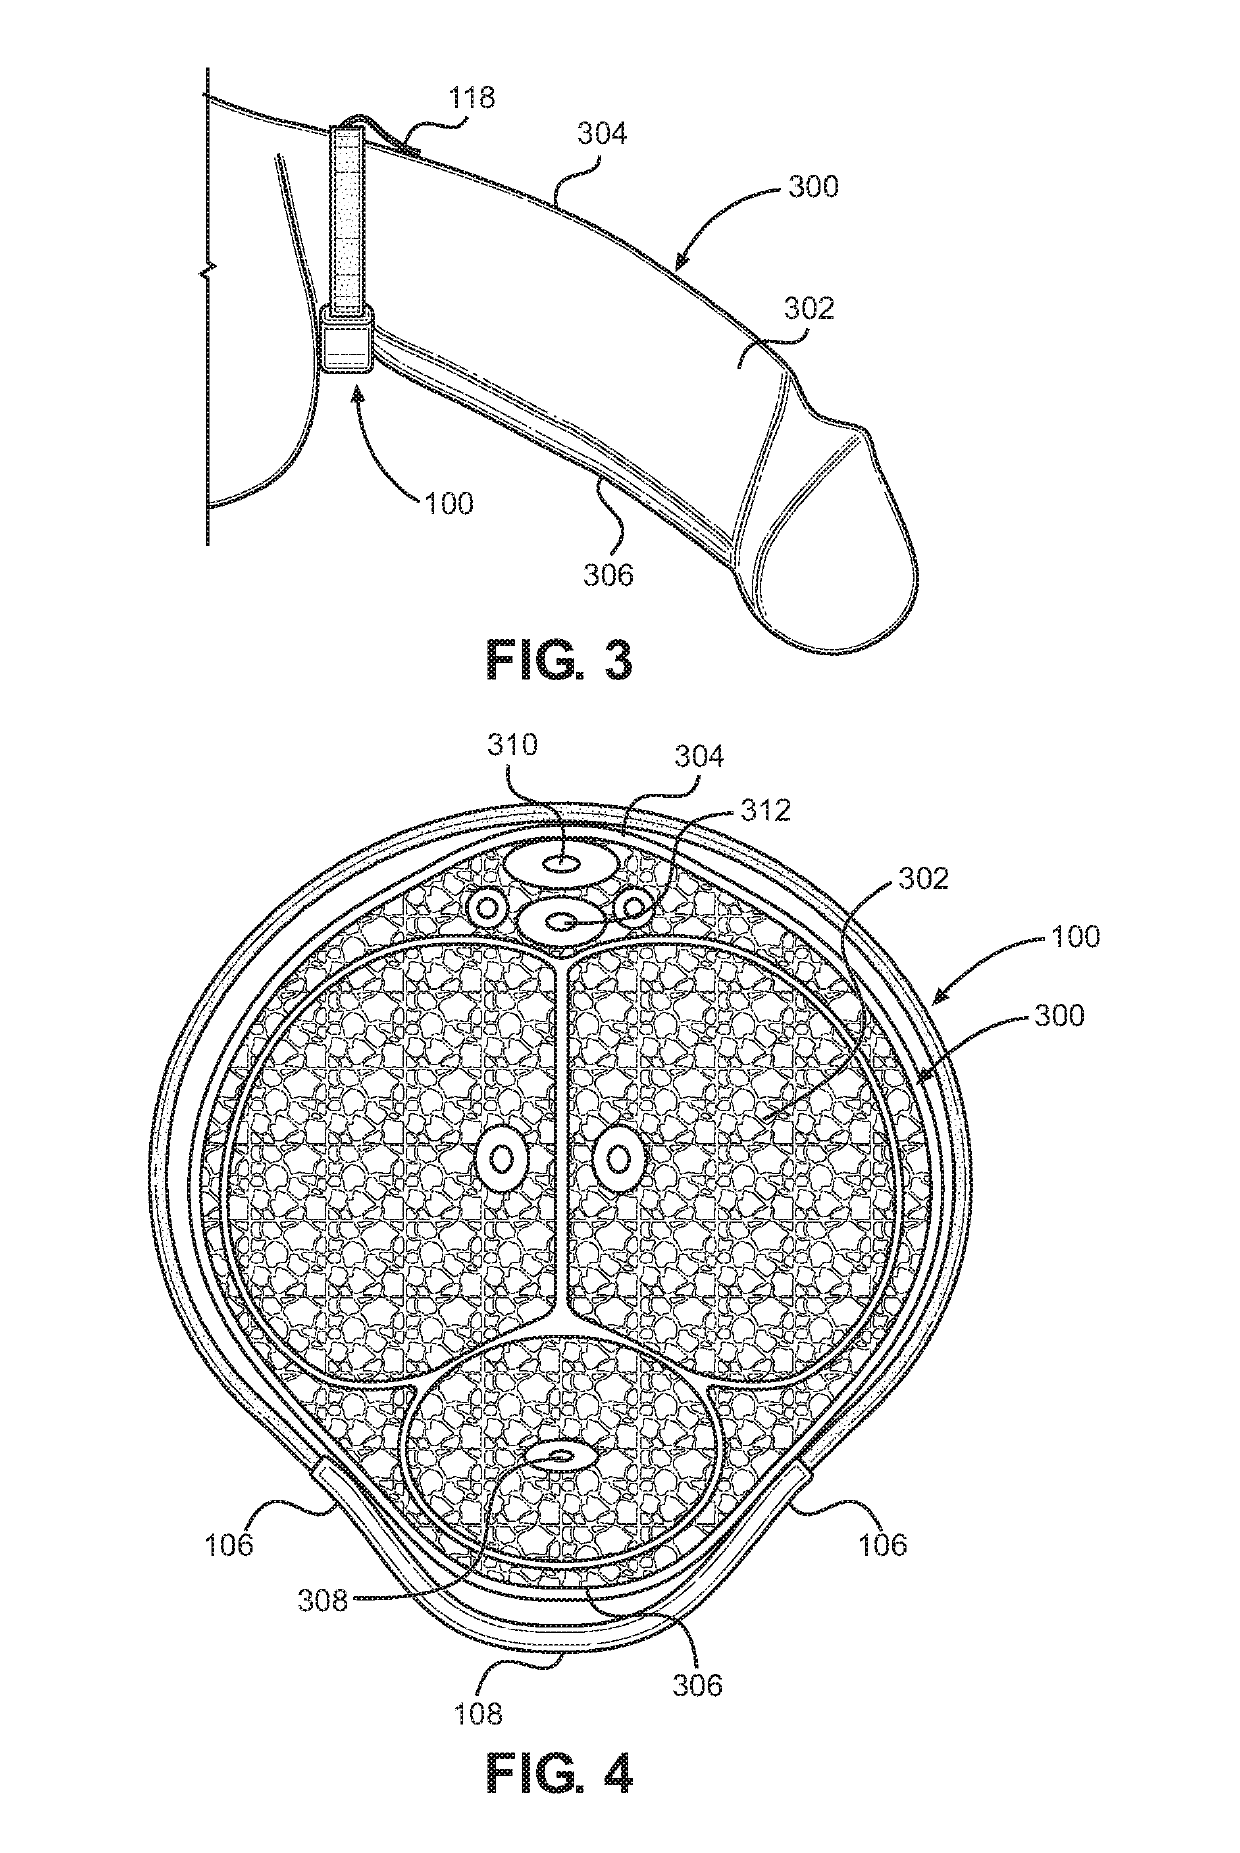 Apparatus for treating erectile dysfunction and enhancing penile enlargement